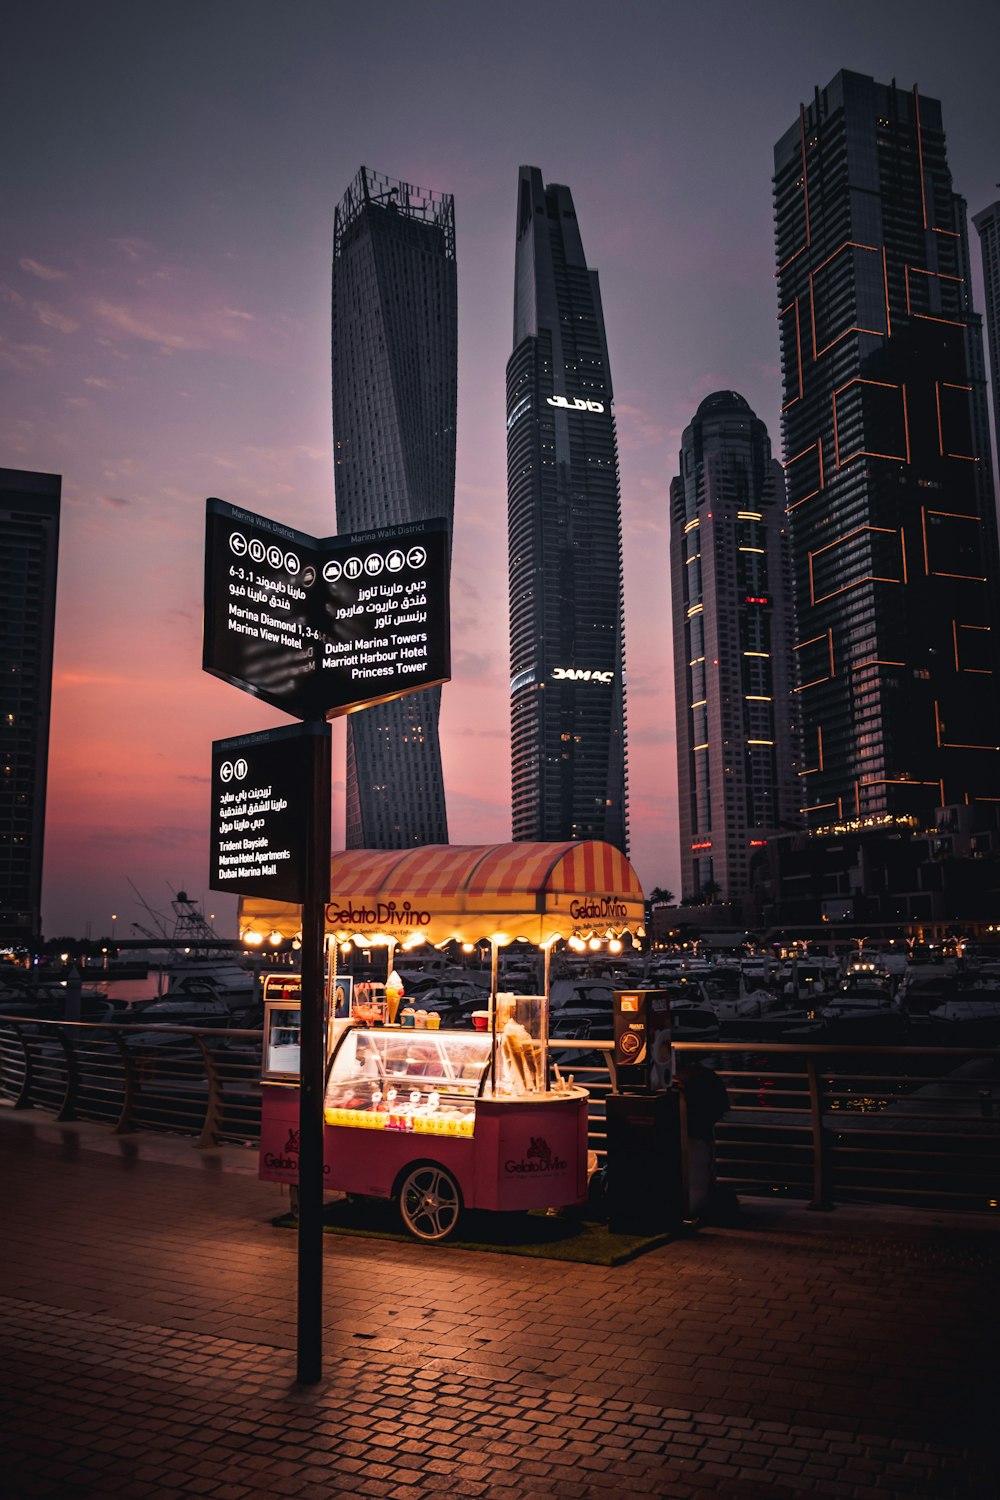 gelato cart near high rise buildings during night time